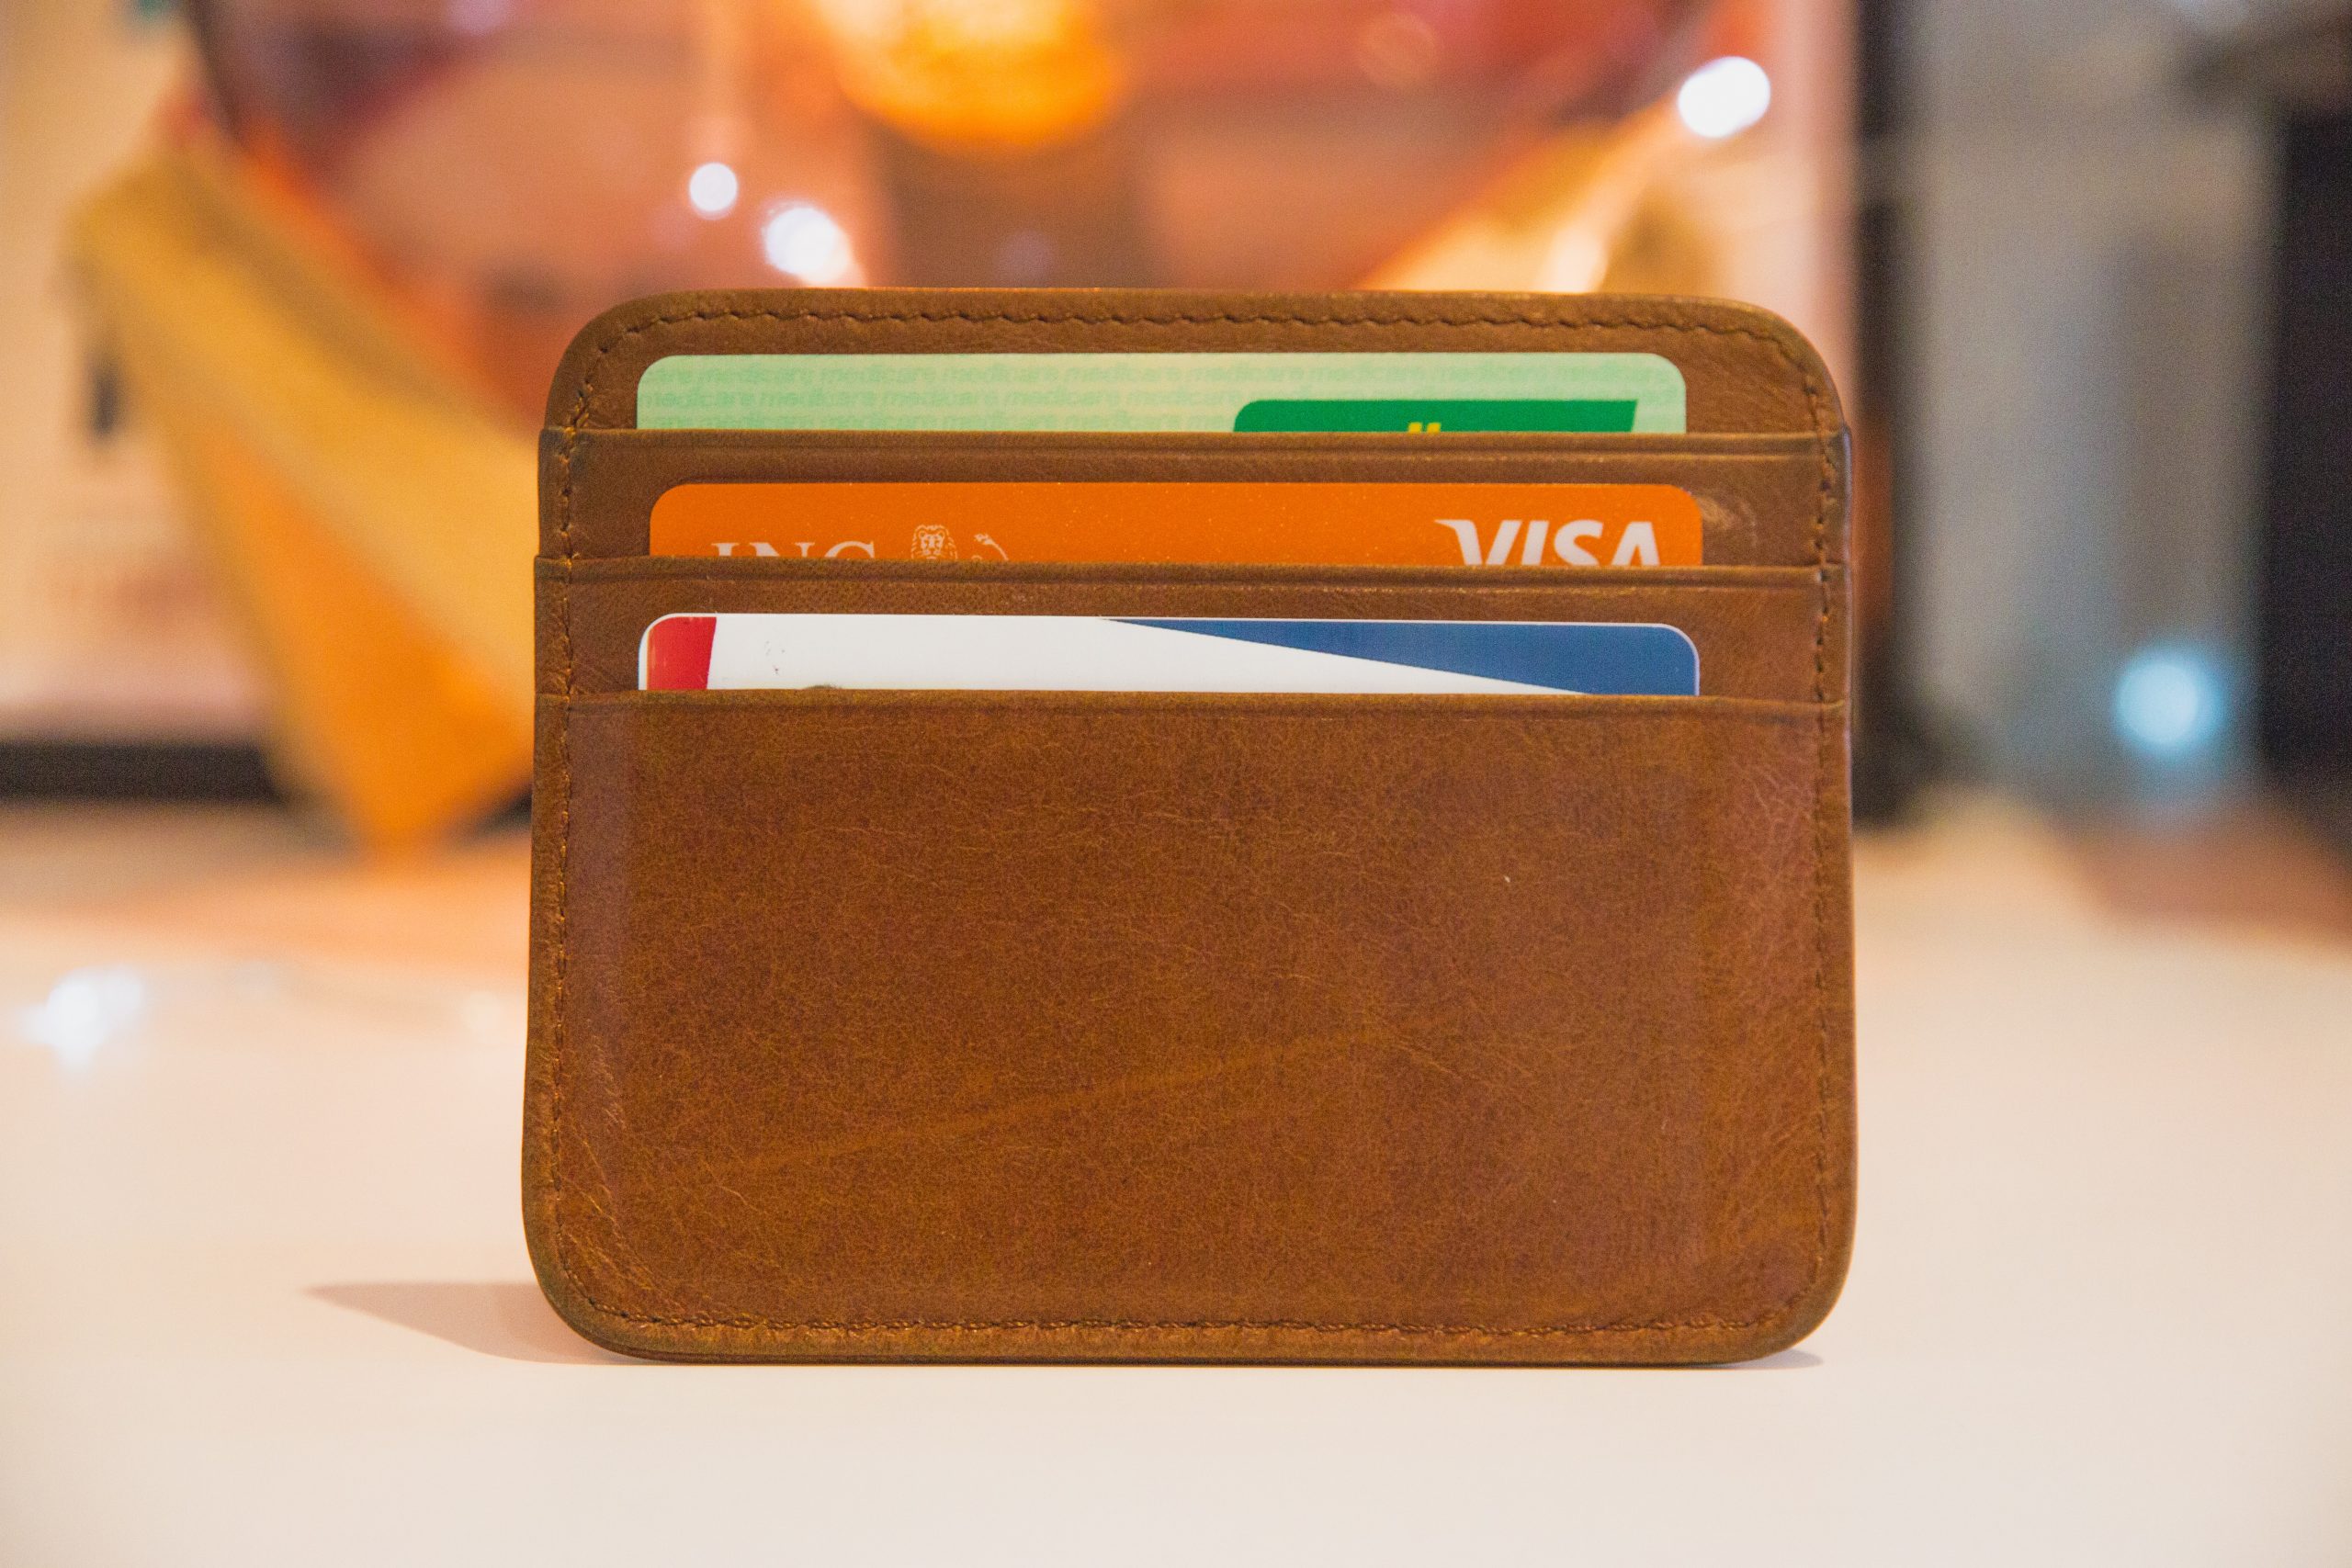 in an article about sports betting and payment options, a wallet with credit cards in it